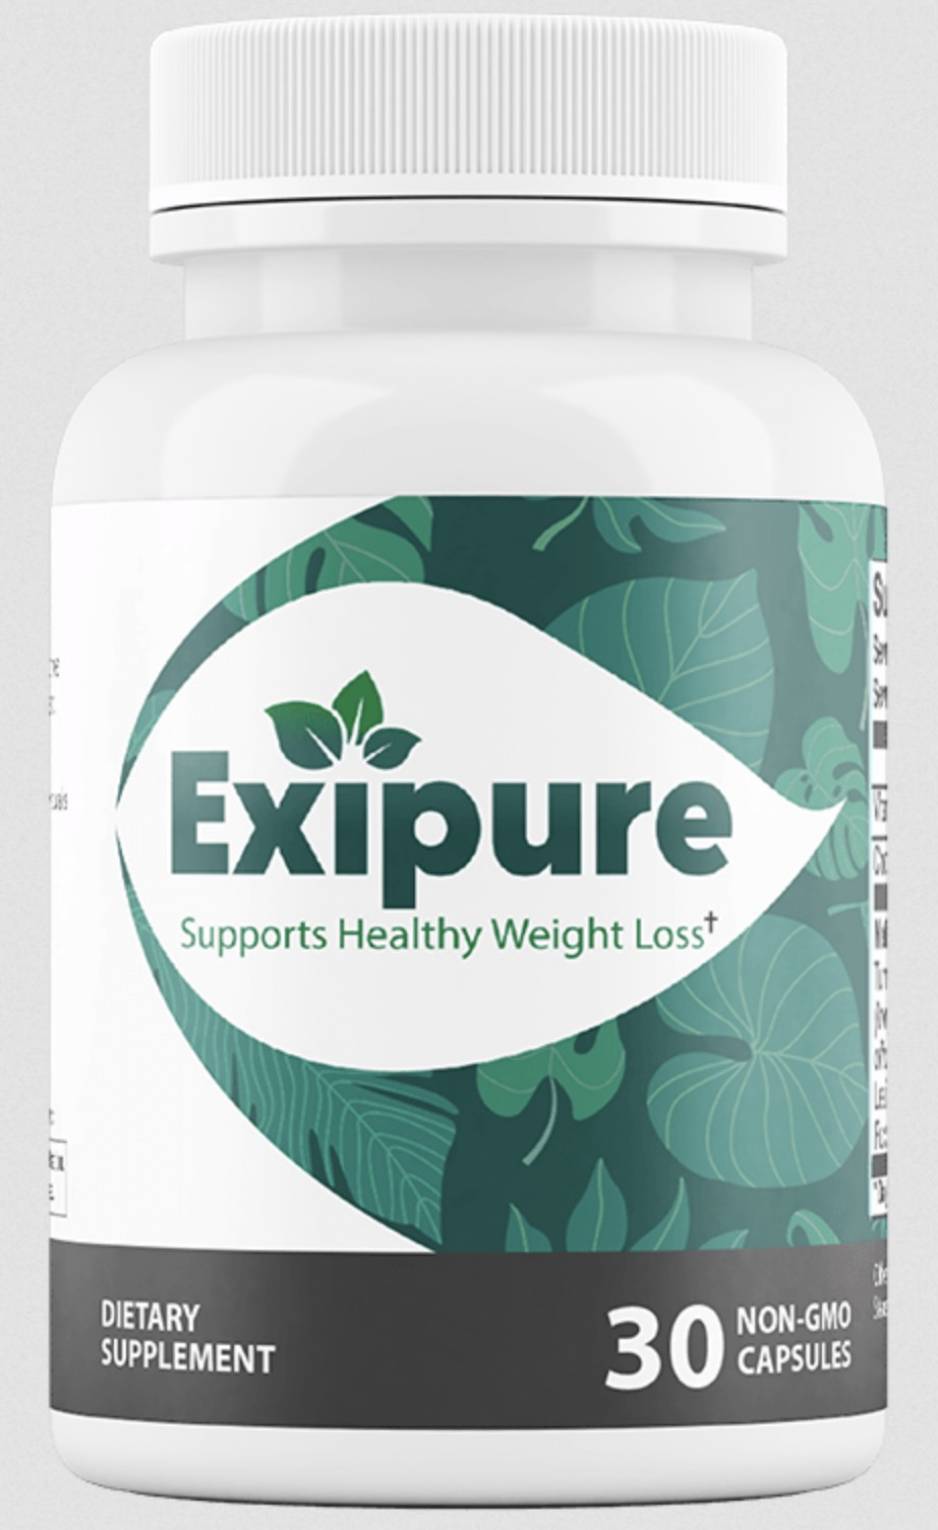 Does Exipure Work